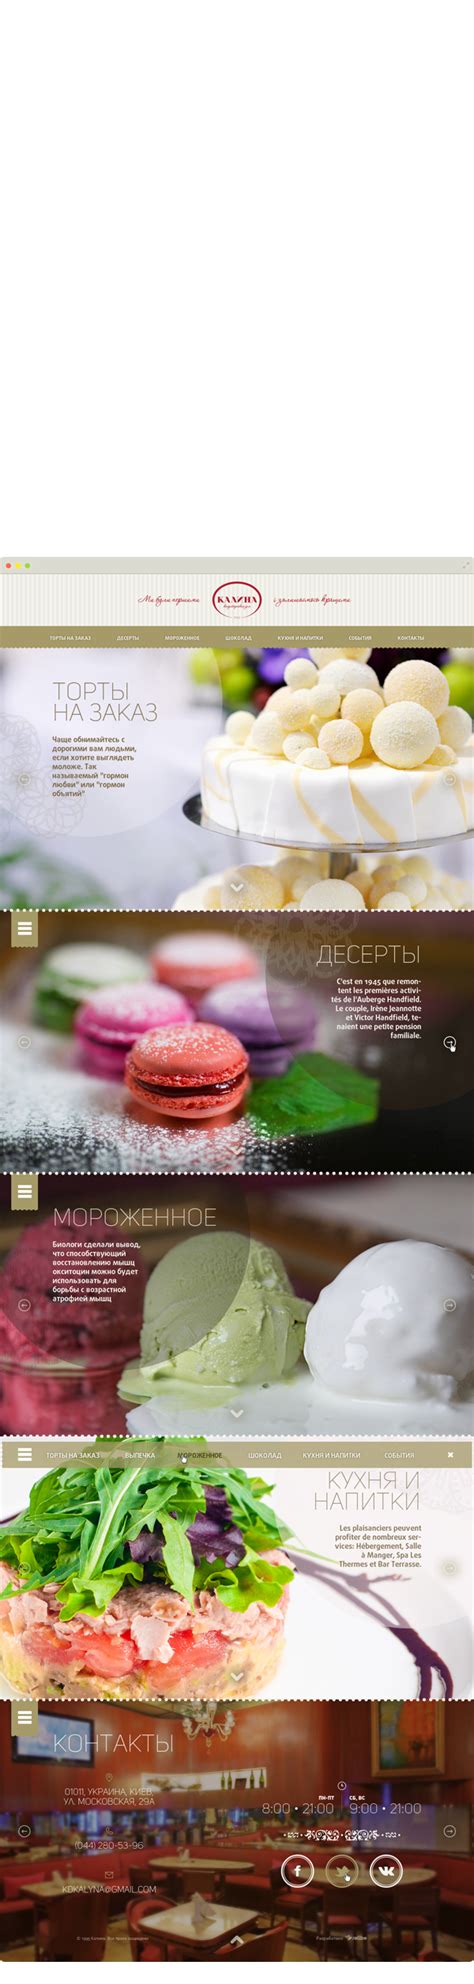 Pastry Shops Corporate Site On Behance